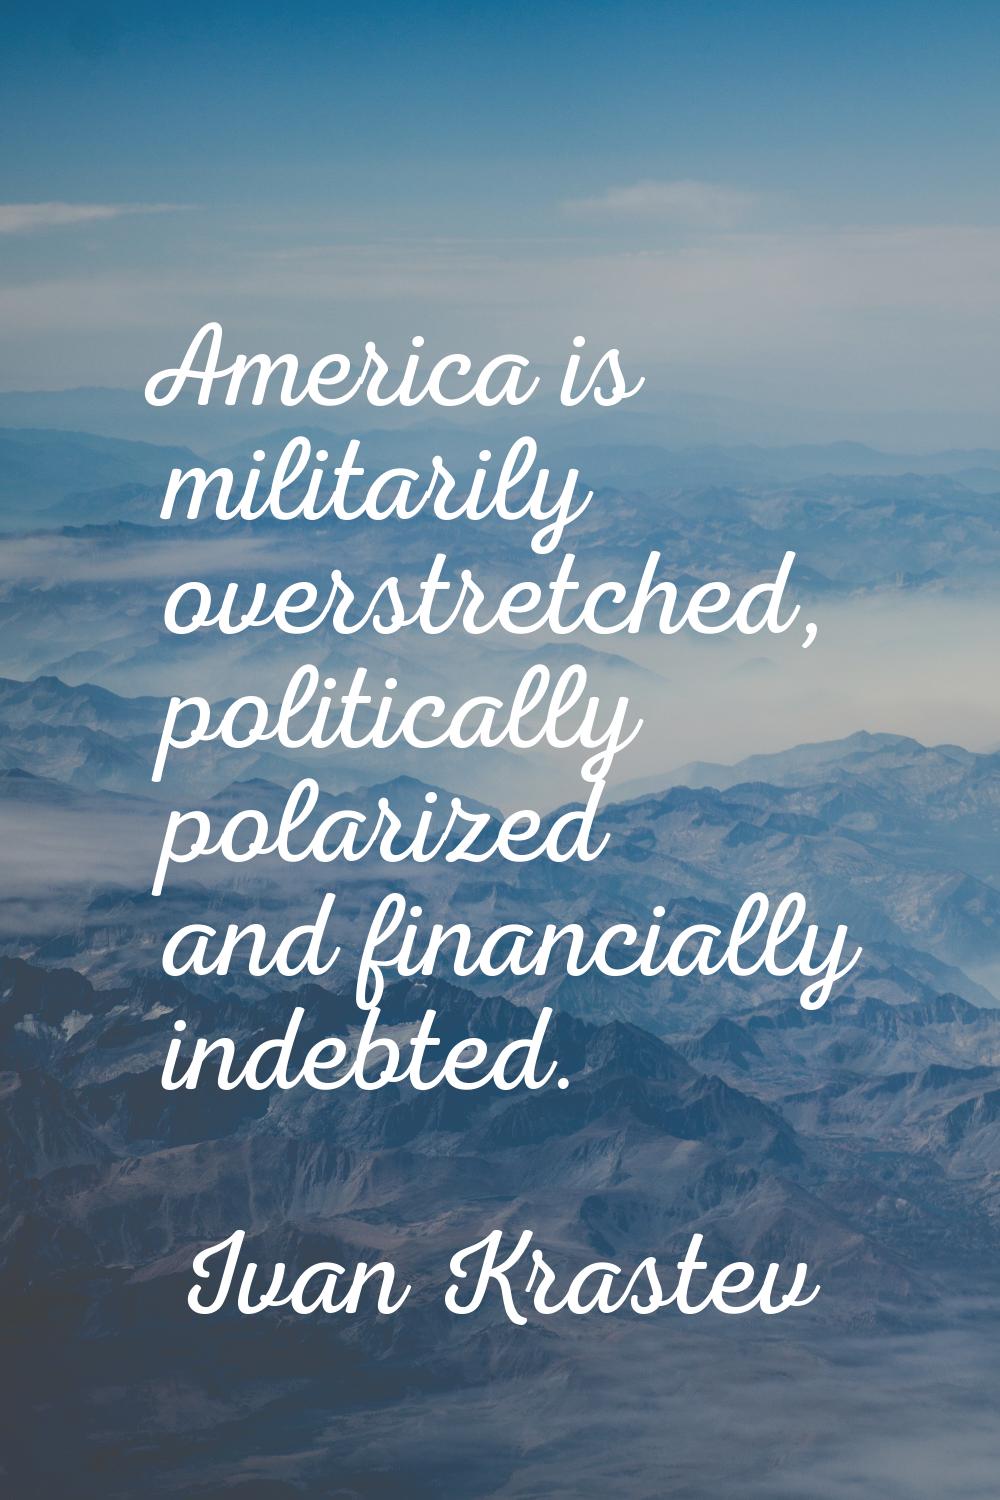 America is militarily overstretched, politically polarized and financially indebted.